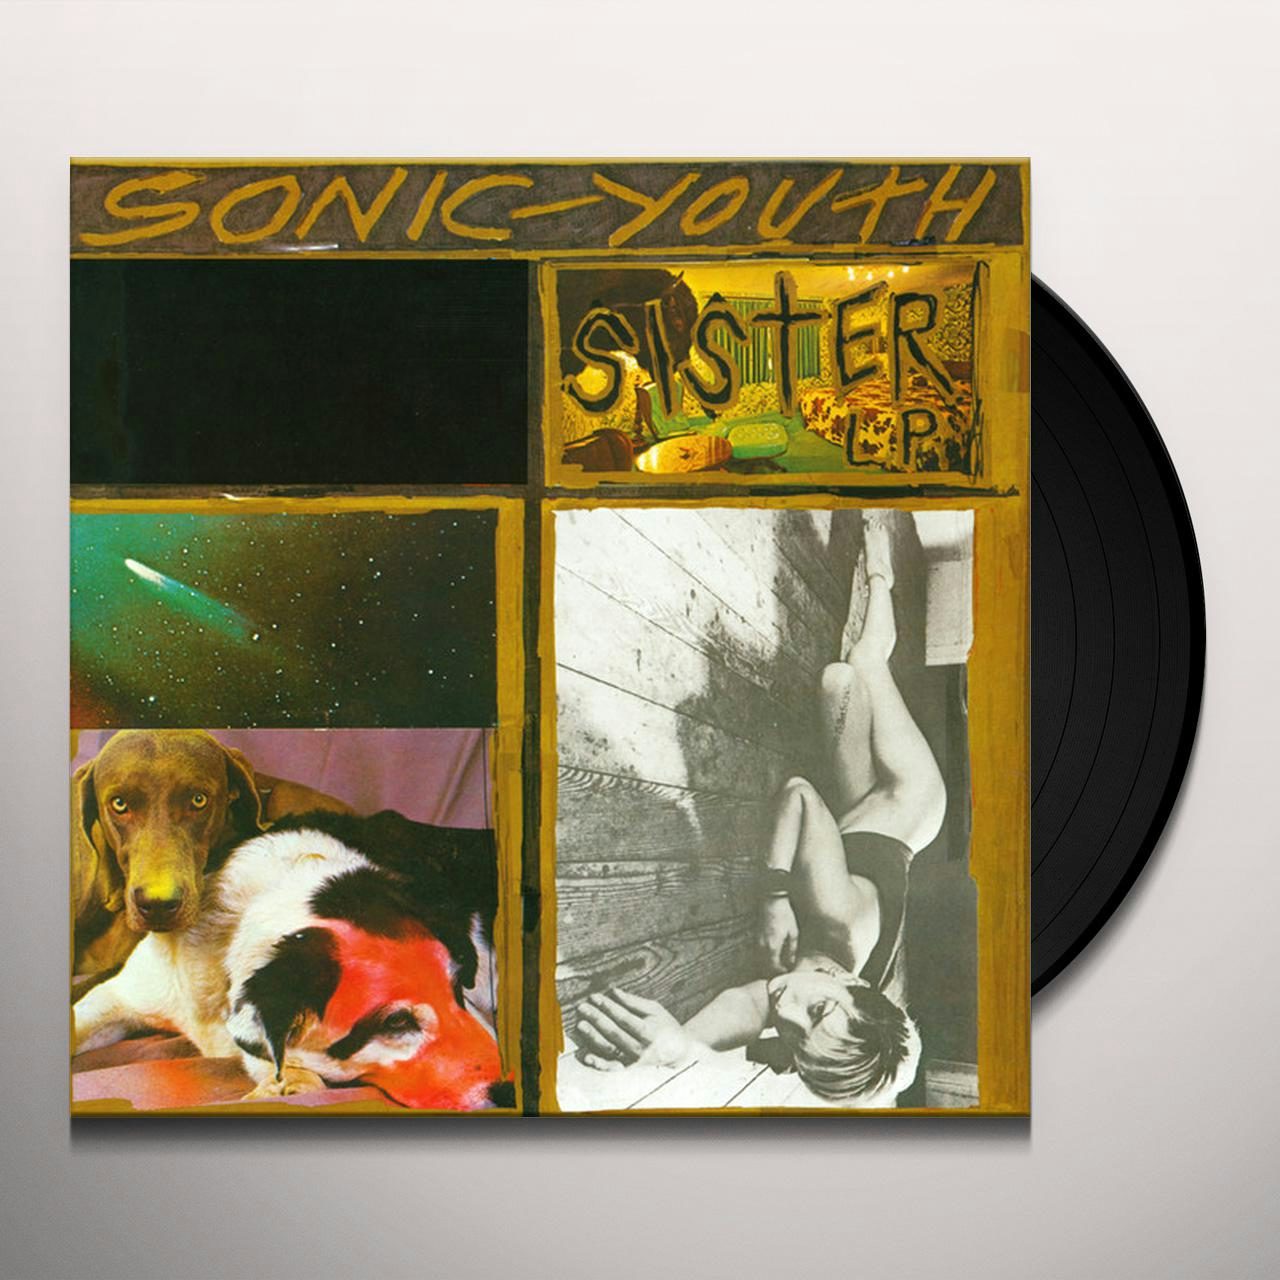 Sister Vinyl Record - Sonic Youth